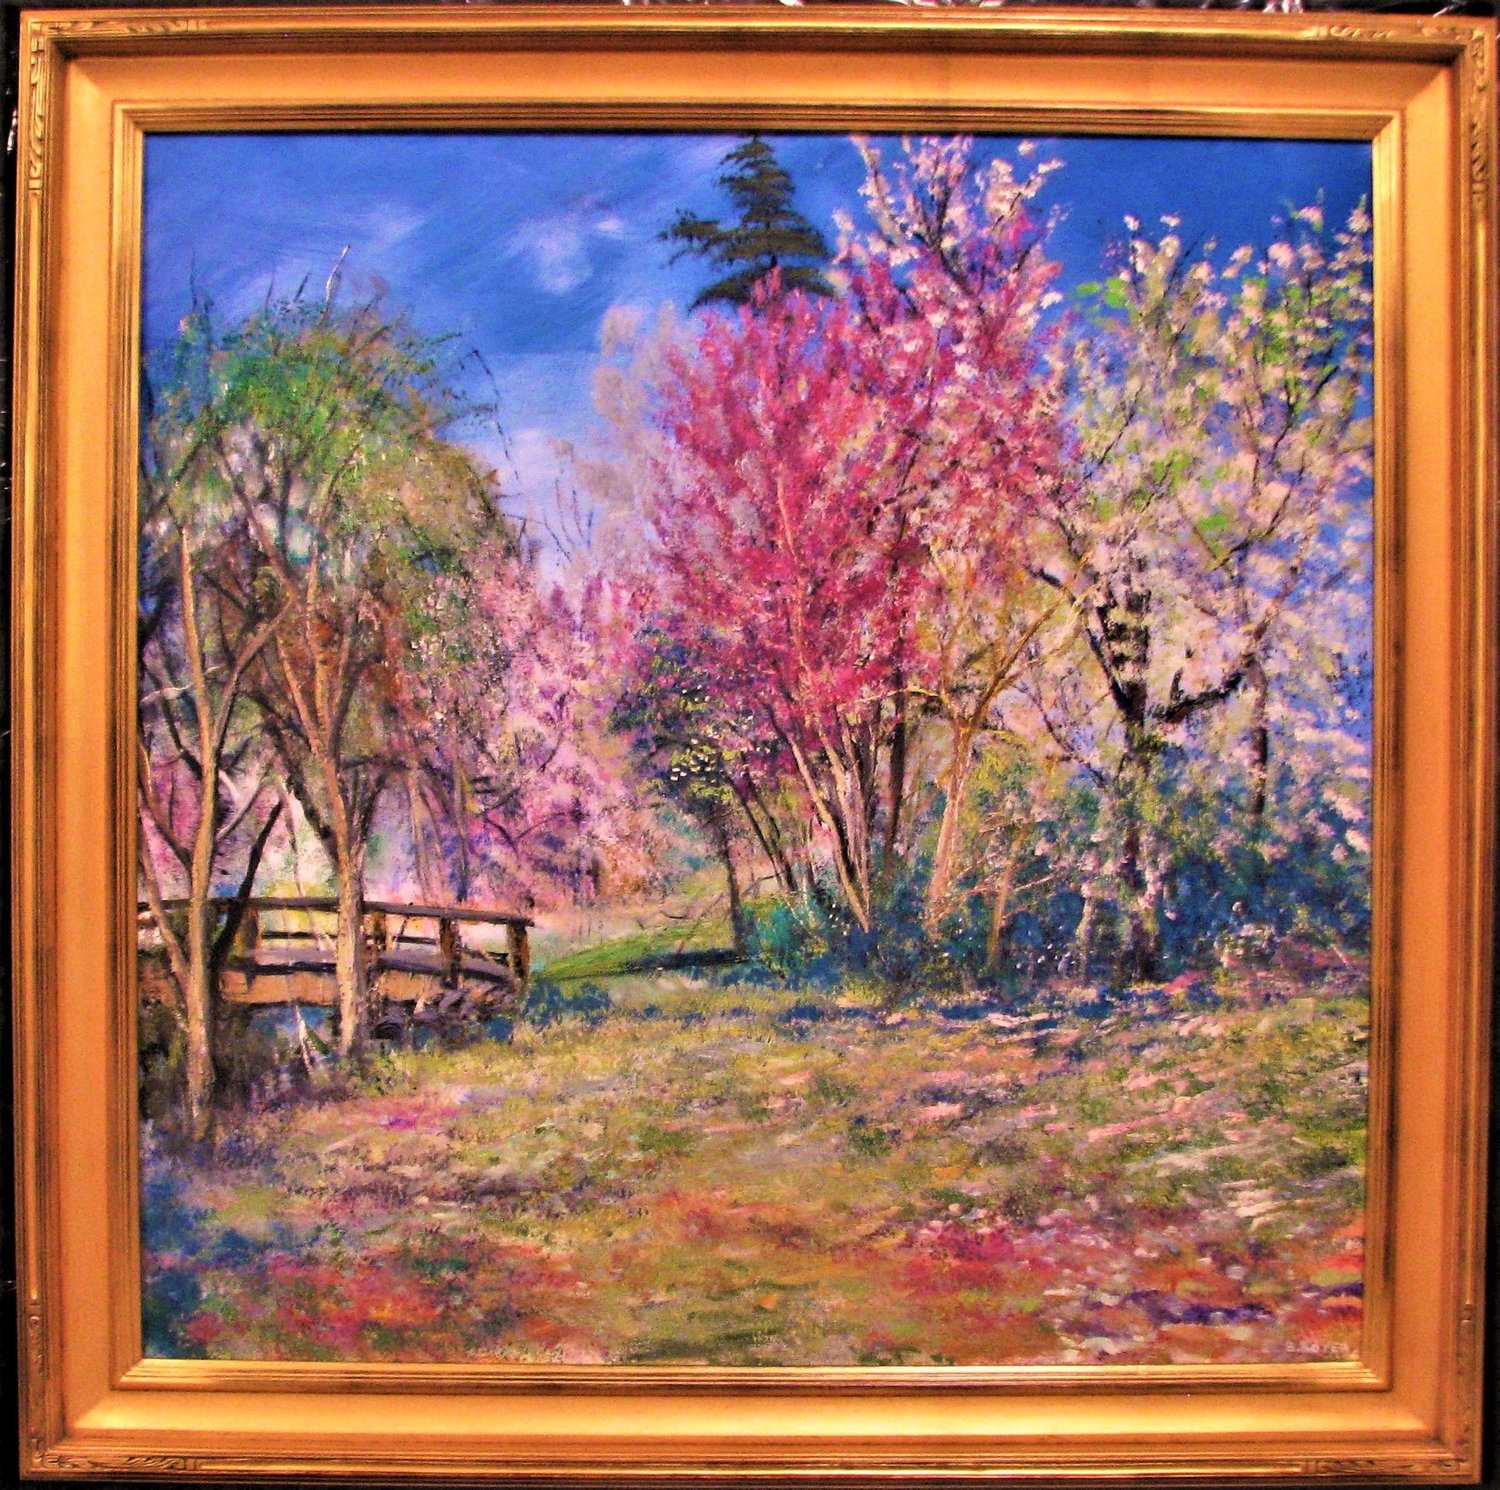 Impressionist artist Bradley Boyer’s painting, “Spring in the Valley.”